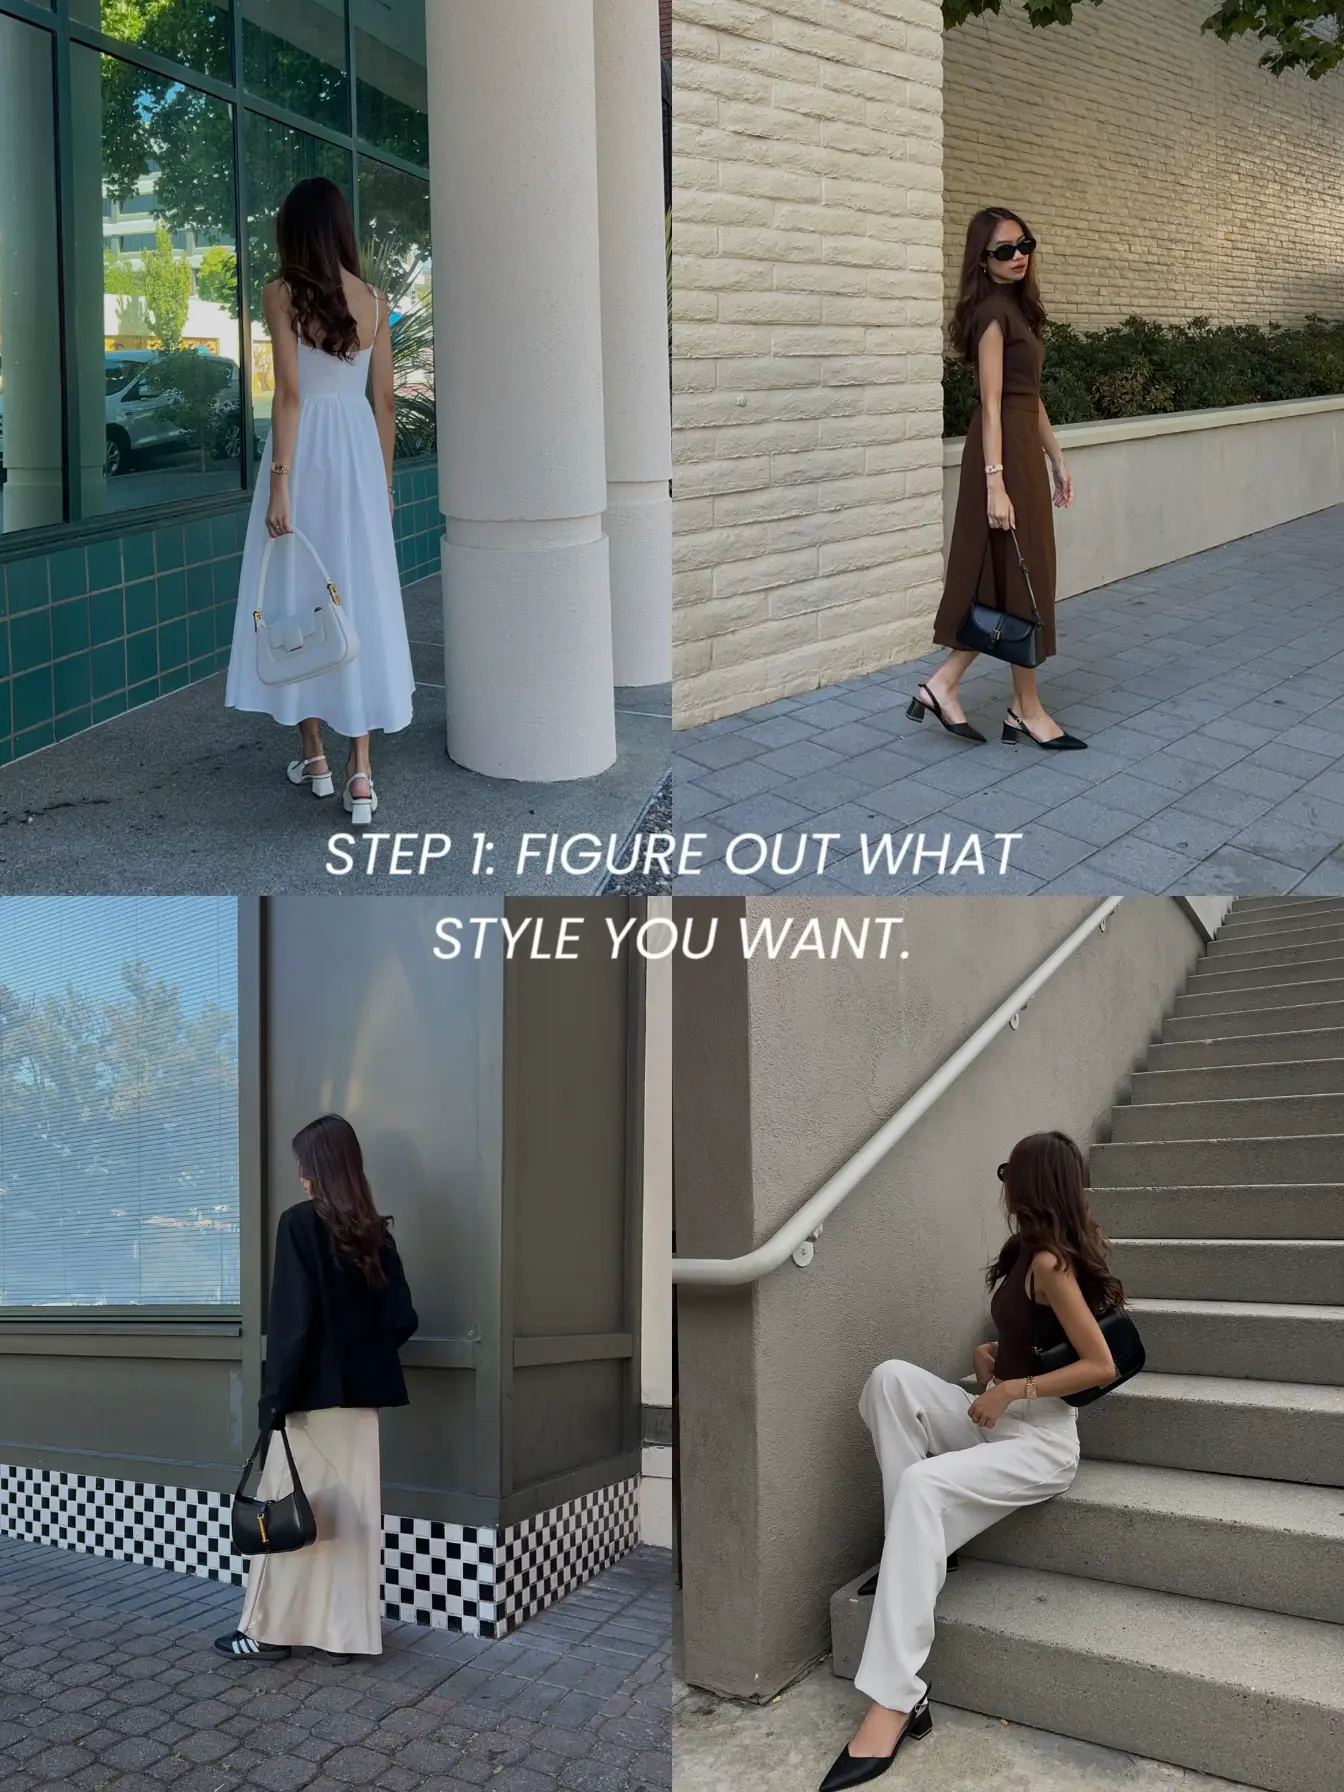 How to Wear a Backless Dress: 5 Refined Tips for Radiant Looks